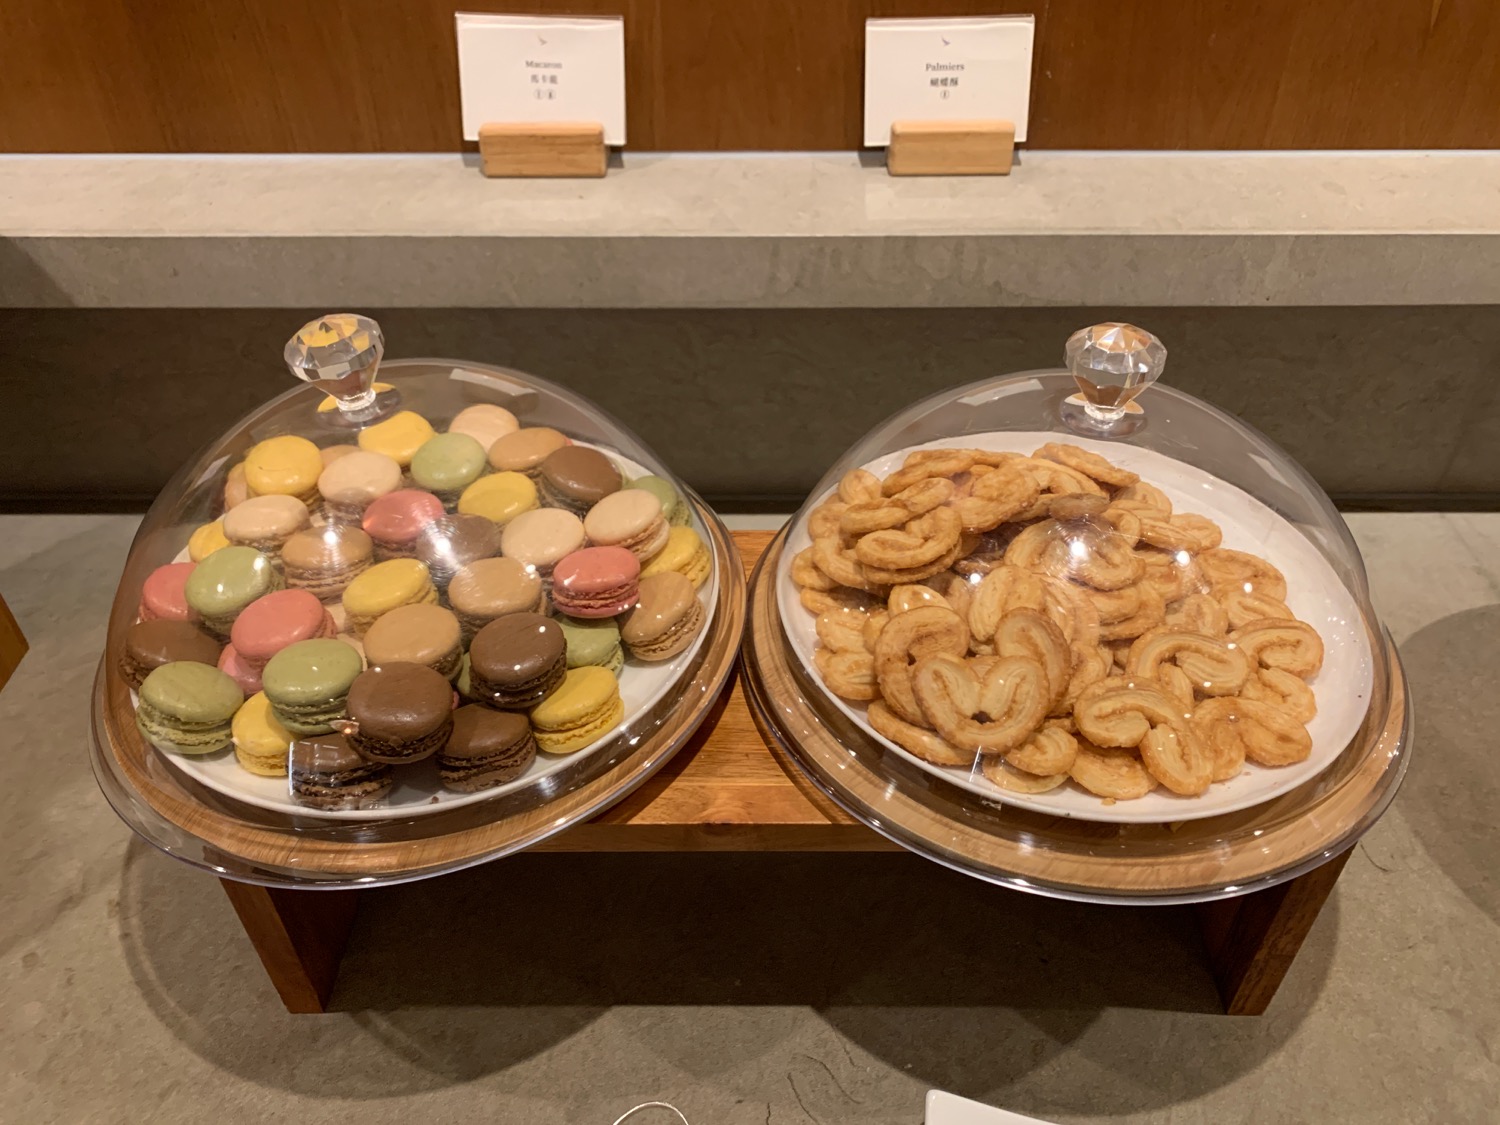 a trays of cookies and crackers on a table